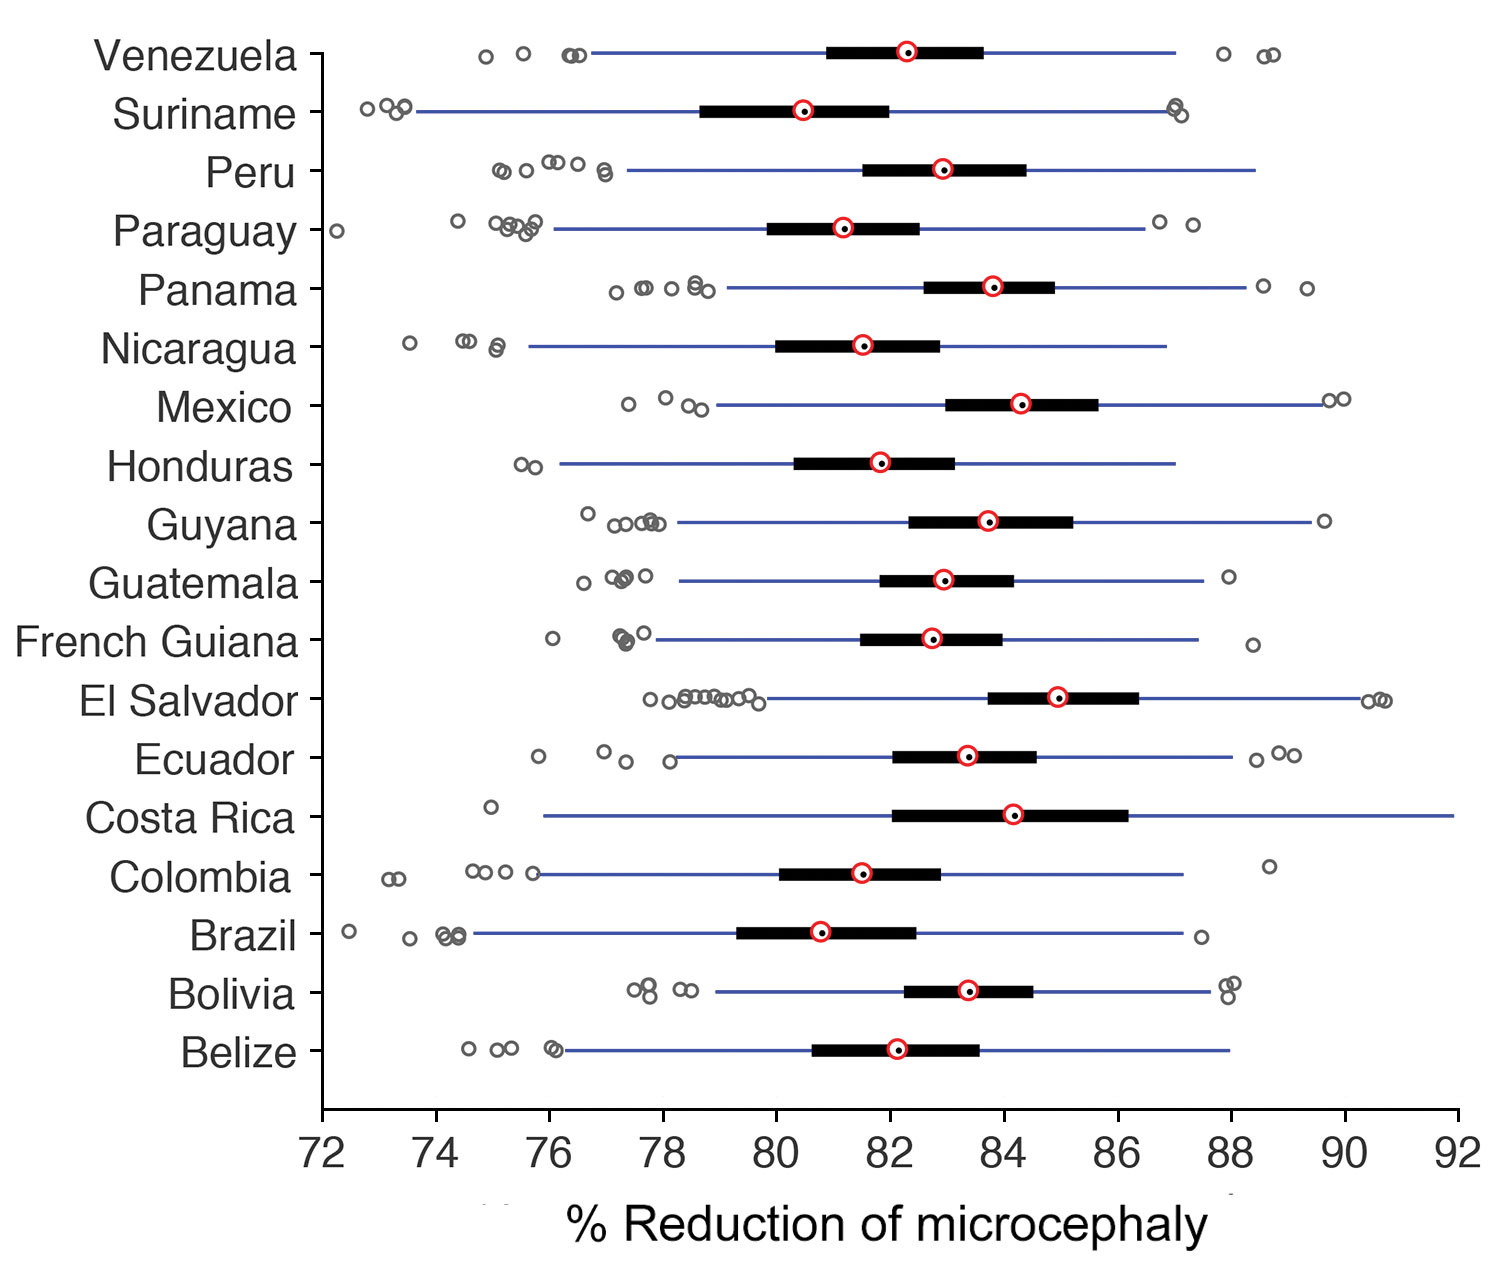 Box plots for the percentage reduction of microcephaly as a result of Zika virus vaccination. Red circles indicate medians; black bars indicate interquartile range (IQR); blue lines indicate extended range, from minimum (25th percentile – 1.5 IQR) to maximum (75th percentile + 1.5 IQR); dark circles indicate outliers.